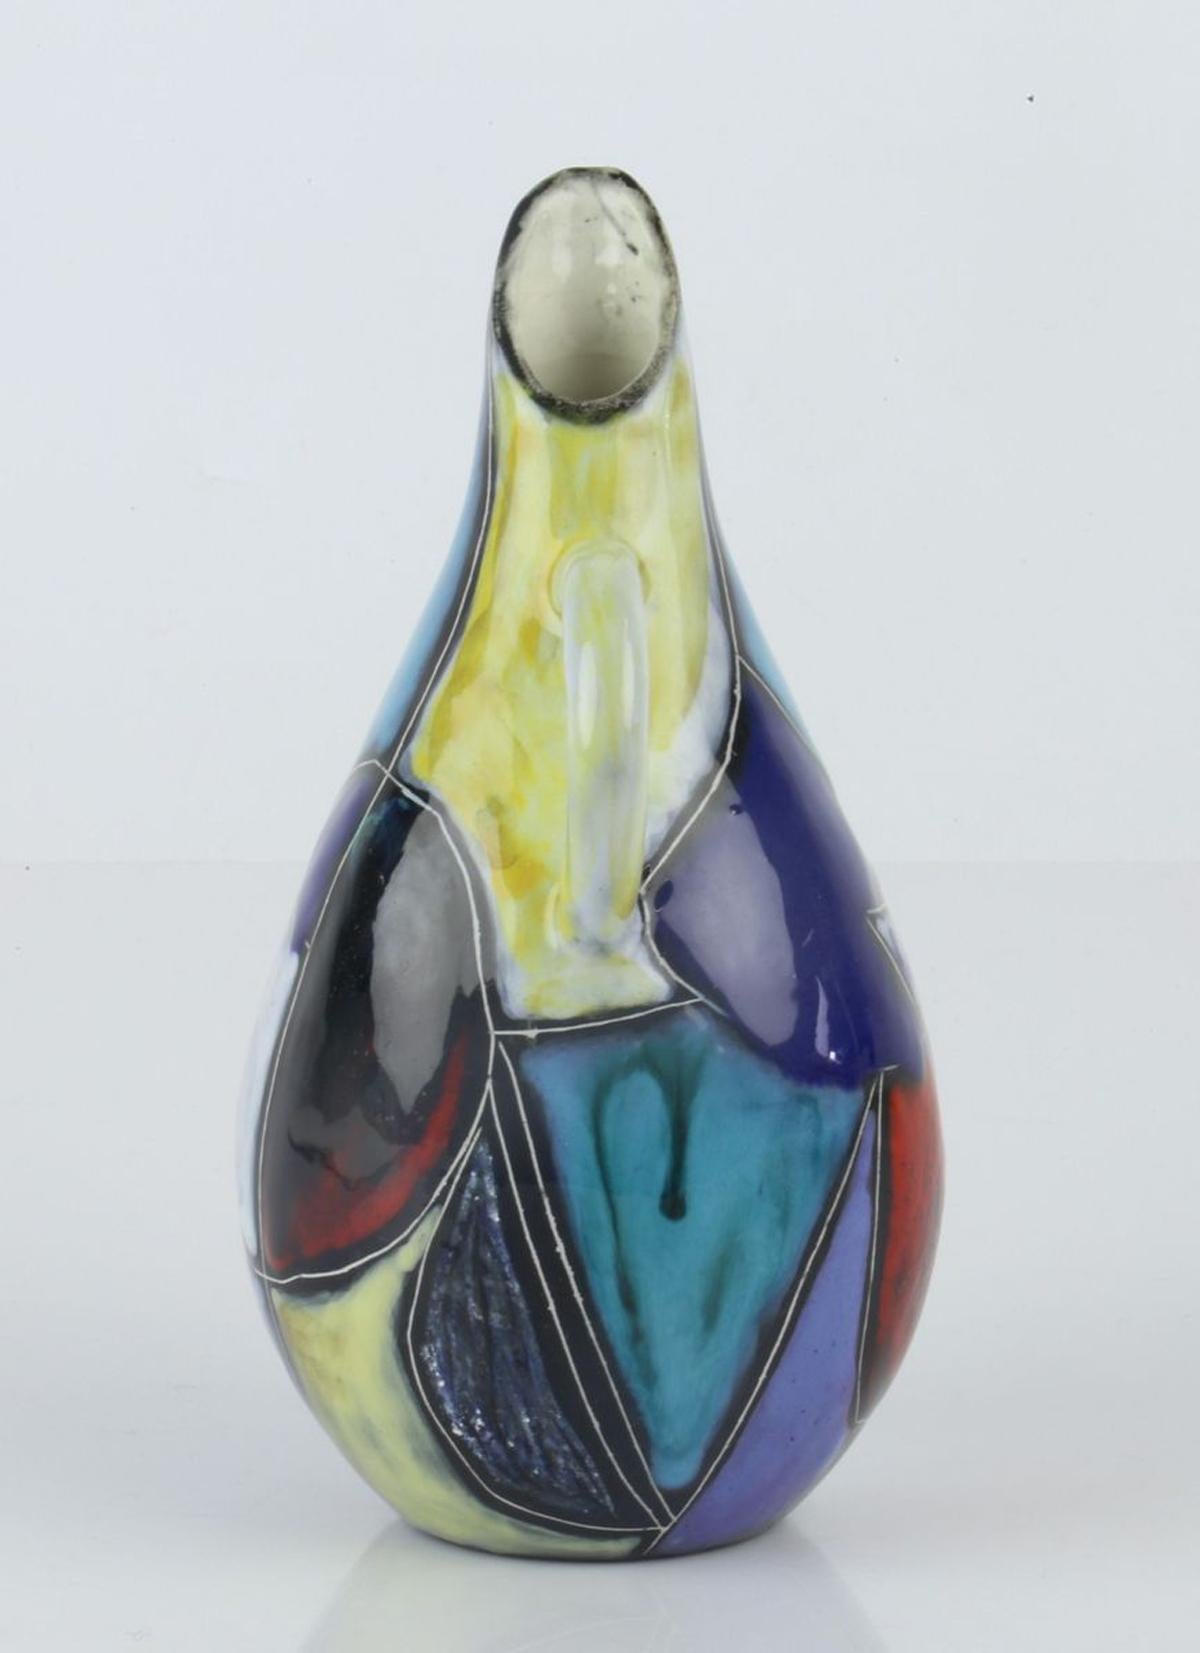 Small and beautiful Marcello Fantoni Studio vase with a handle, In typical Mid-Century style made with bold colors. Signed with his typical signature 